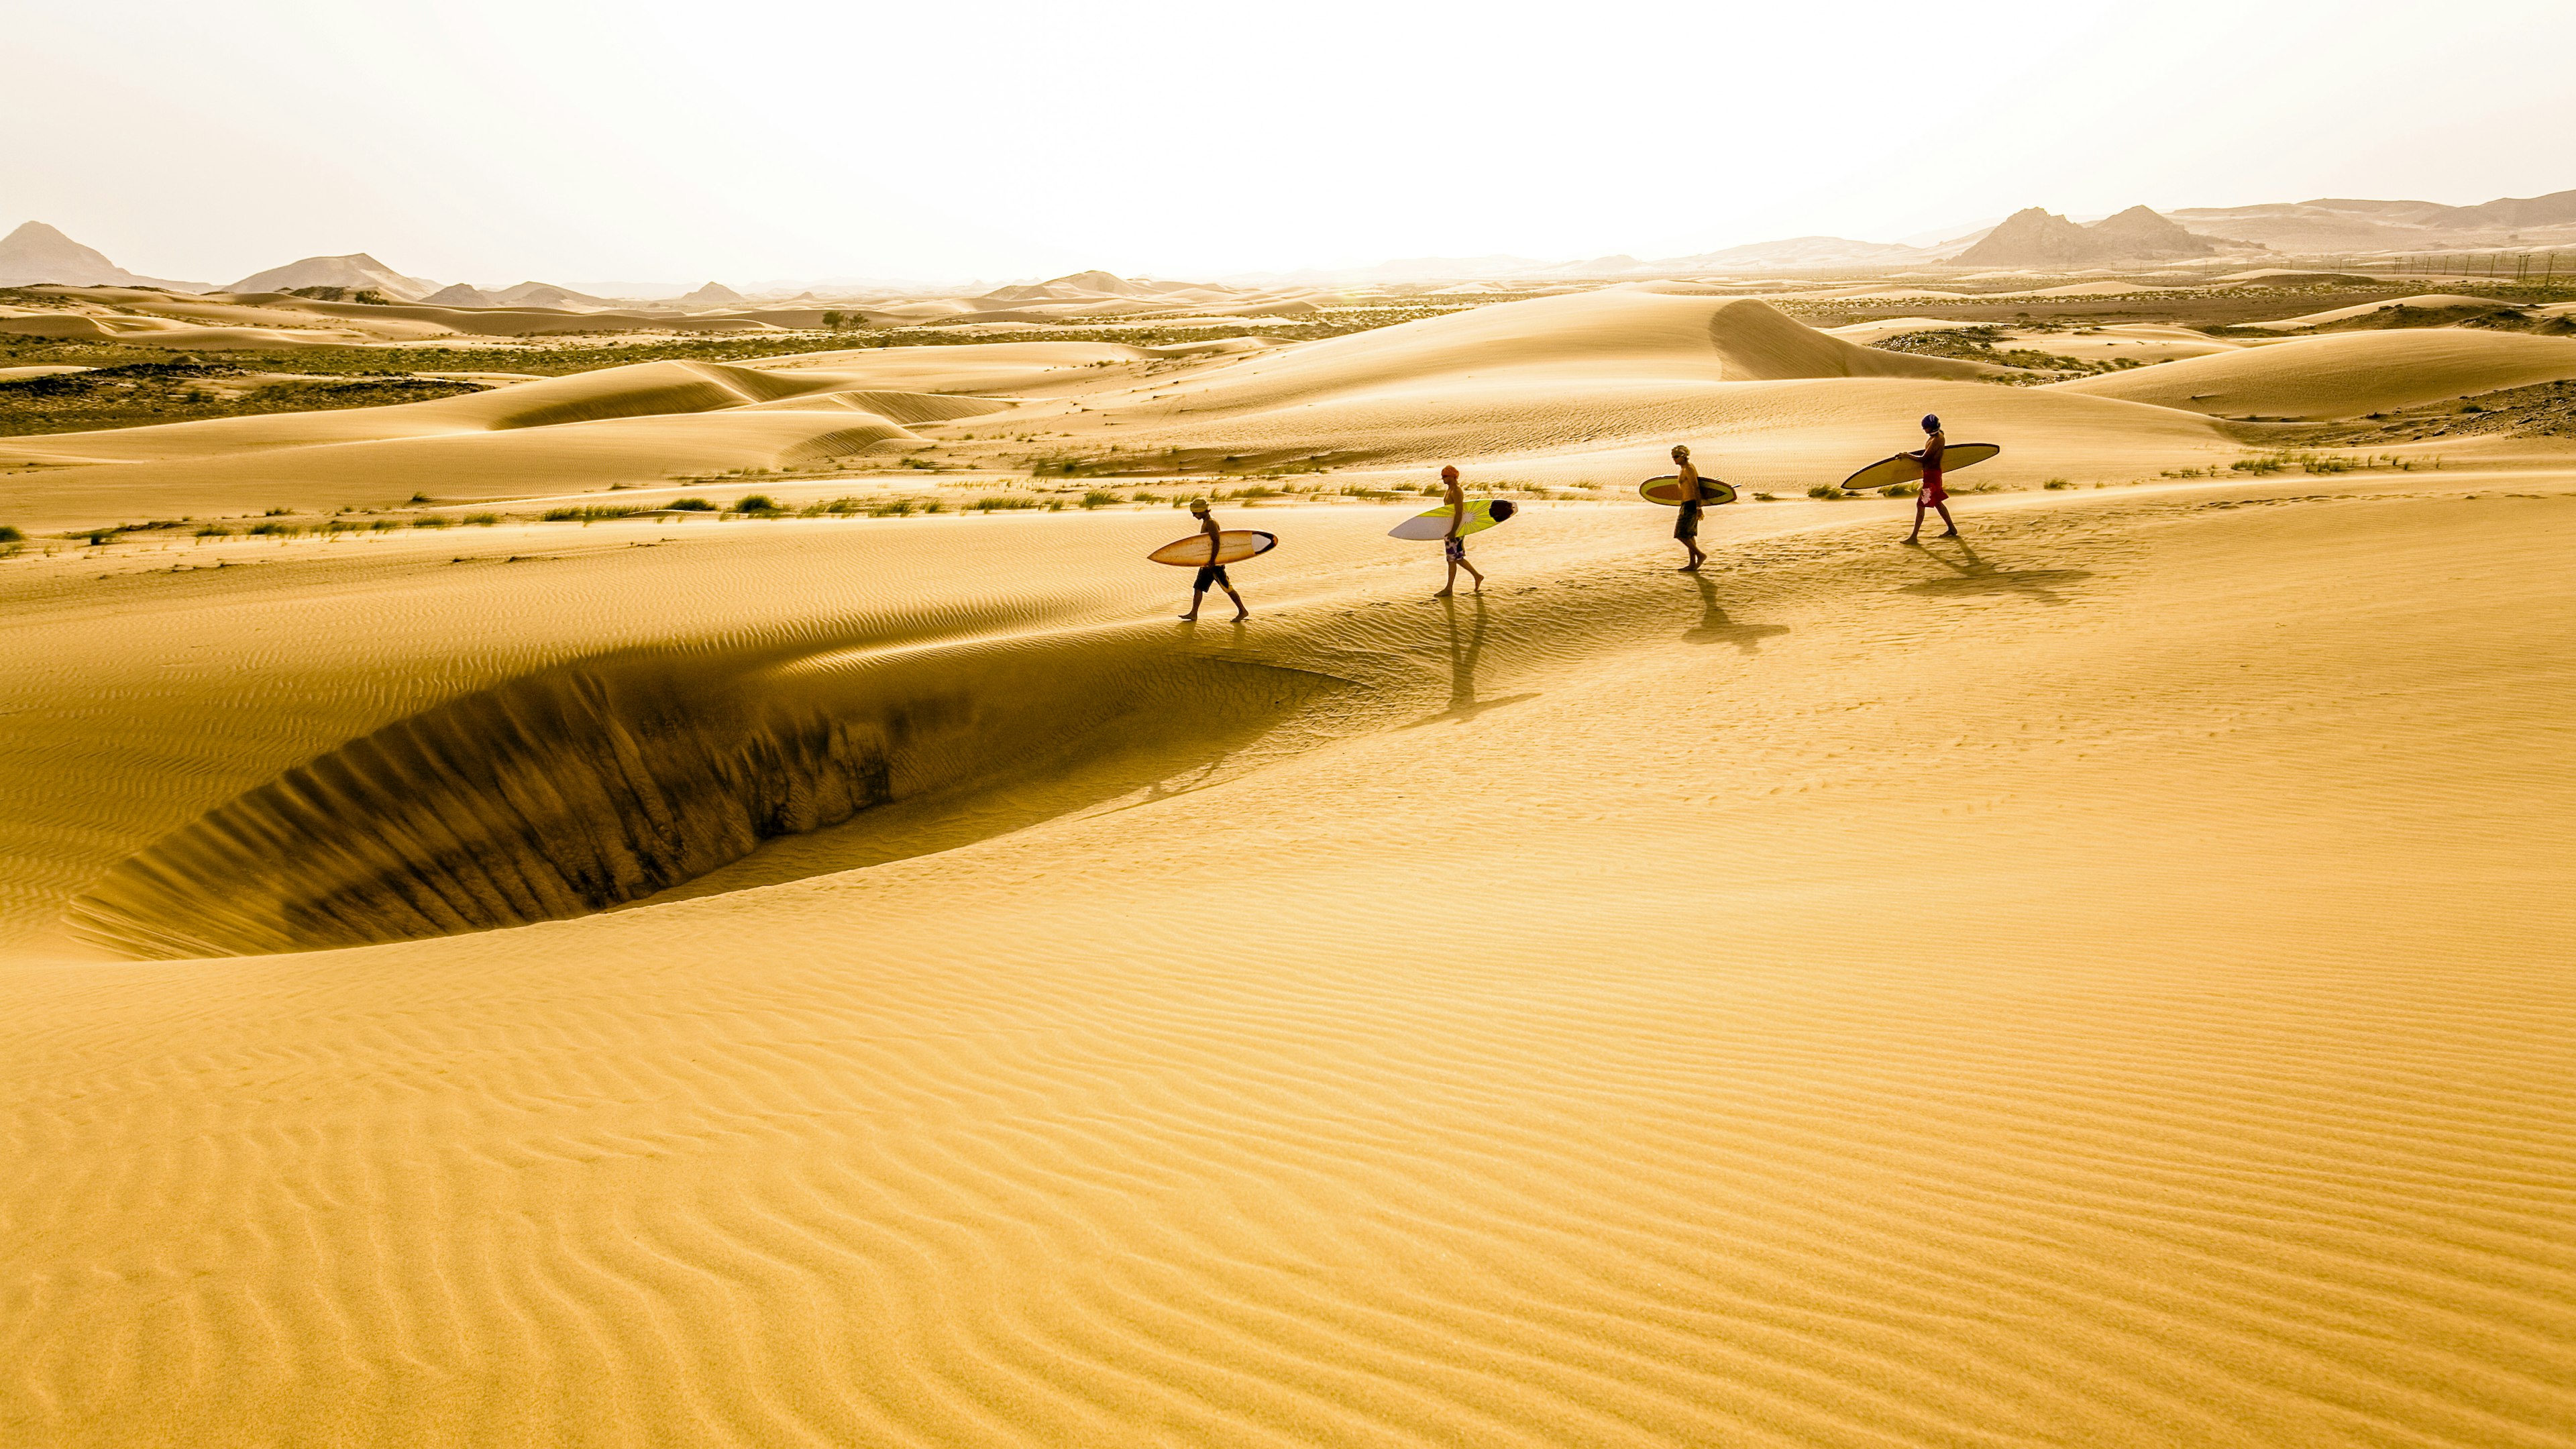 Oman, Ash Sharquiyah, four surfers walking on sand dunes in the desert